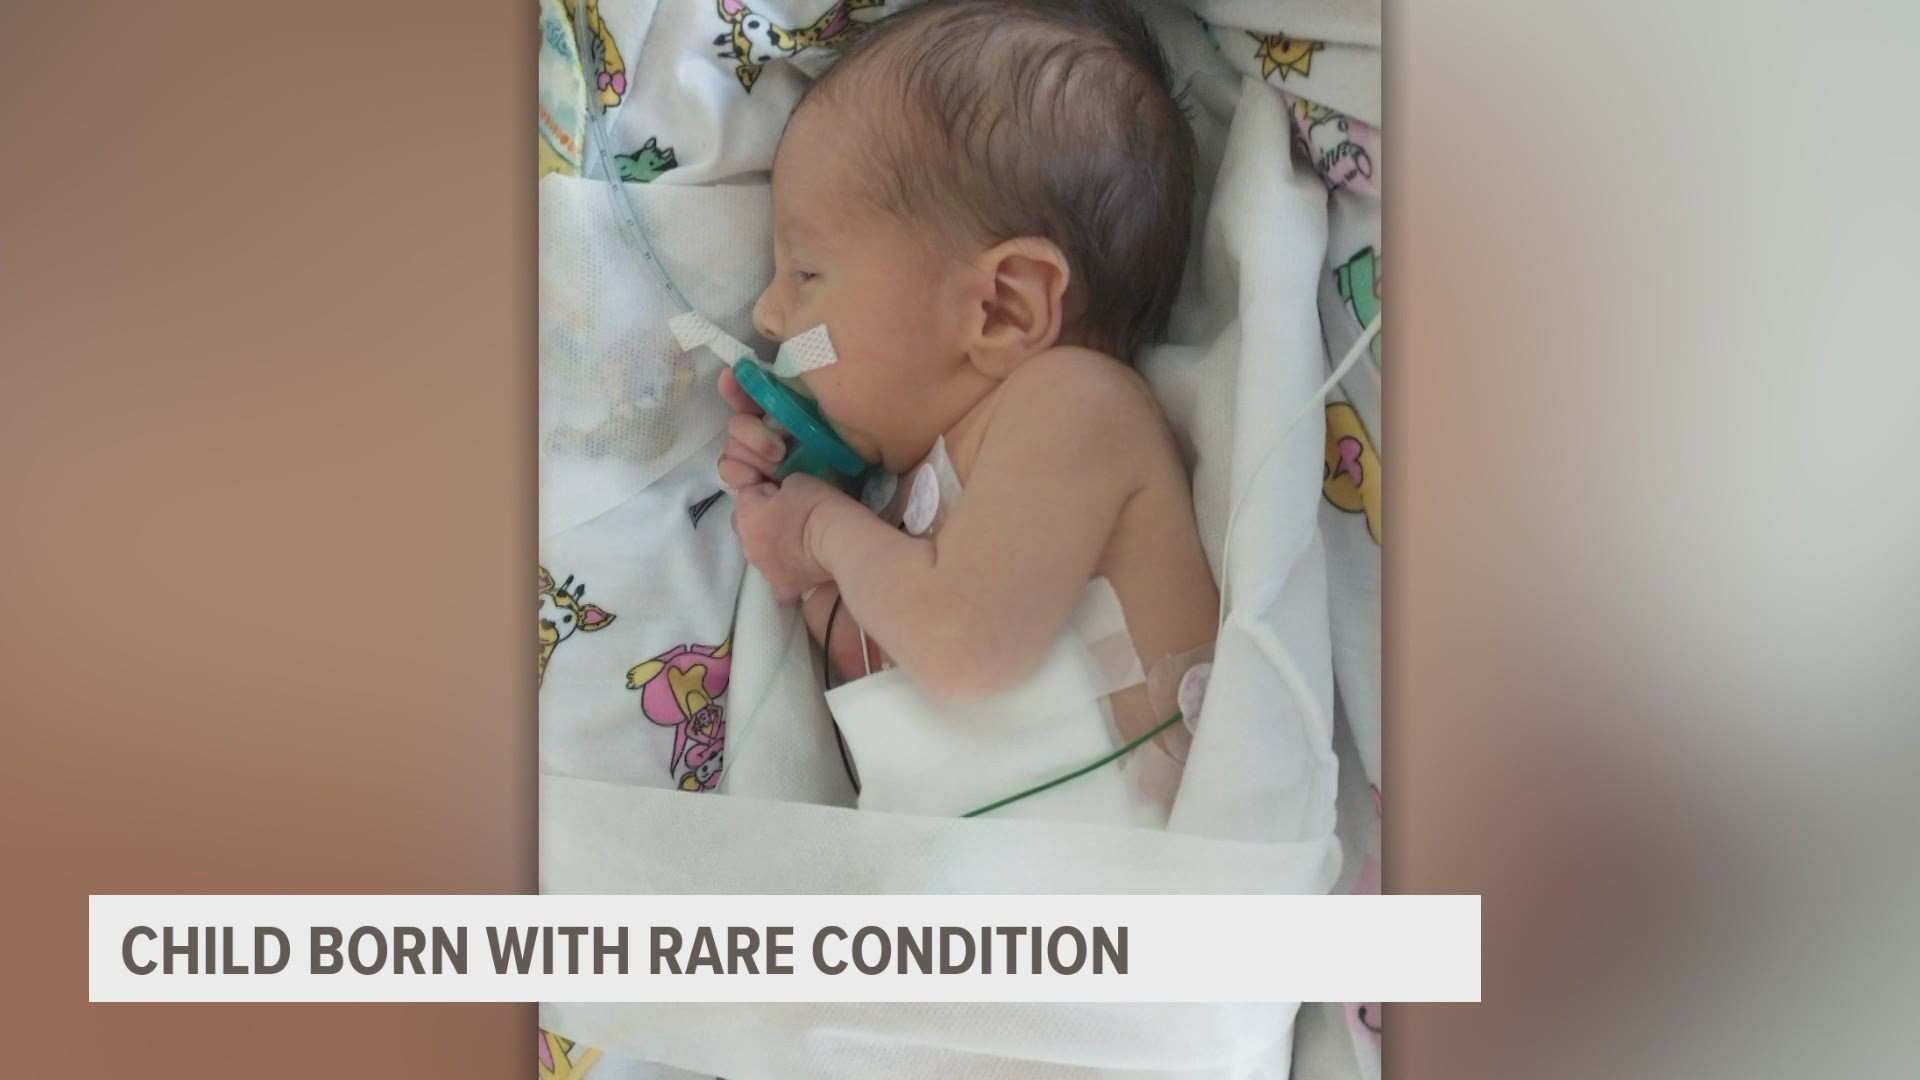 Community members are raising funds to help the mother of a child born with a rare condition, who hasn't left the hospital since birth.